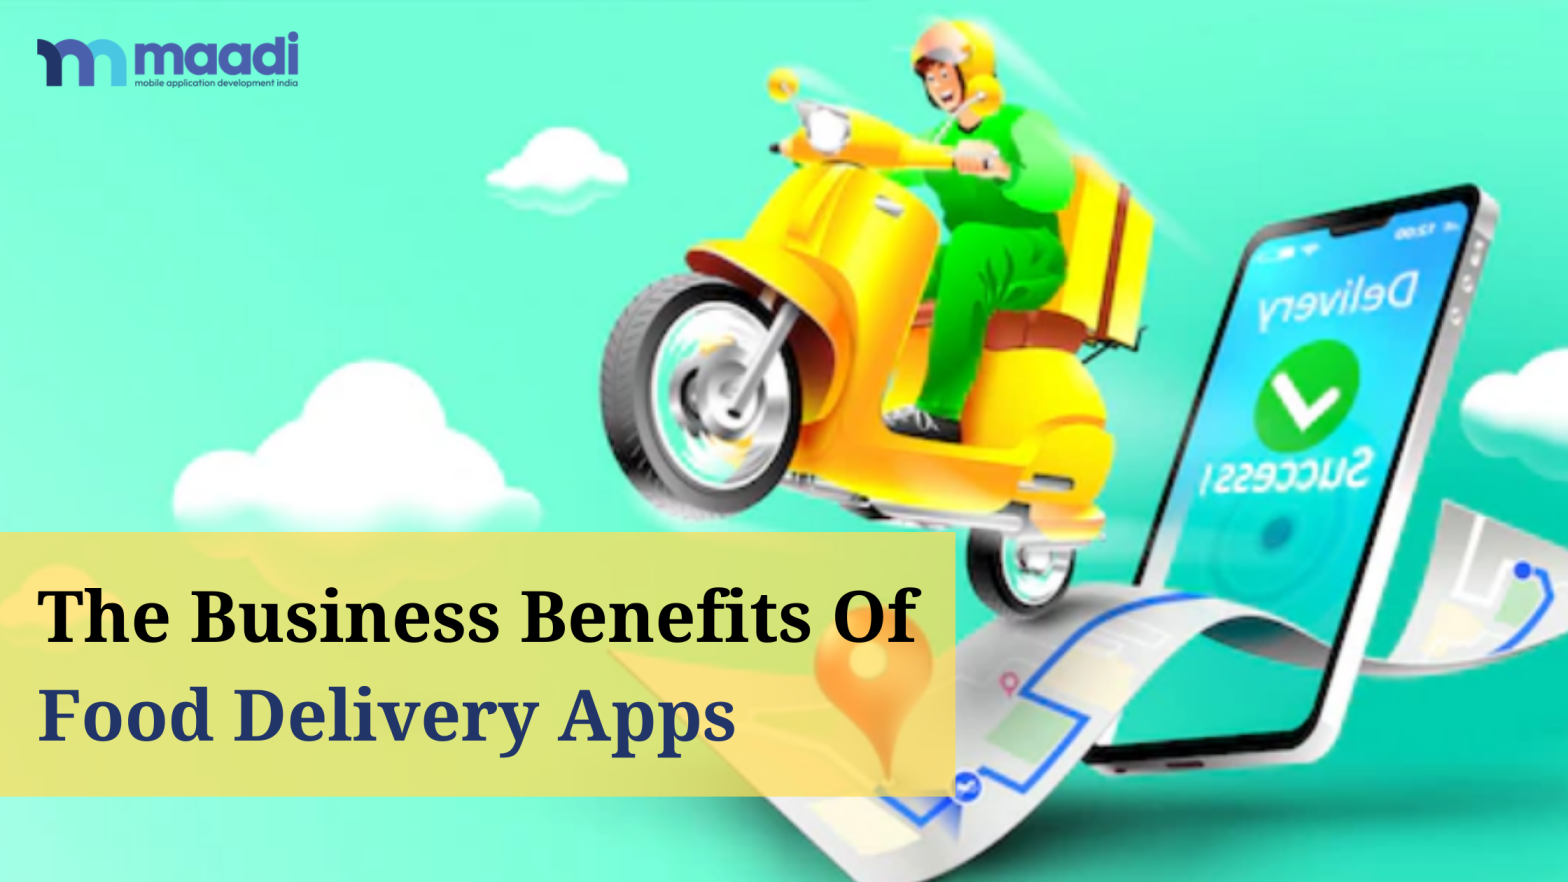 The Business Benefits of Food Delivery Apps